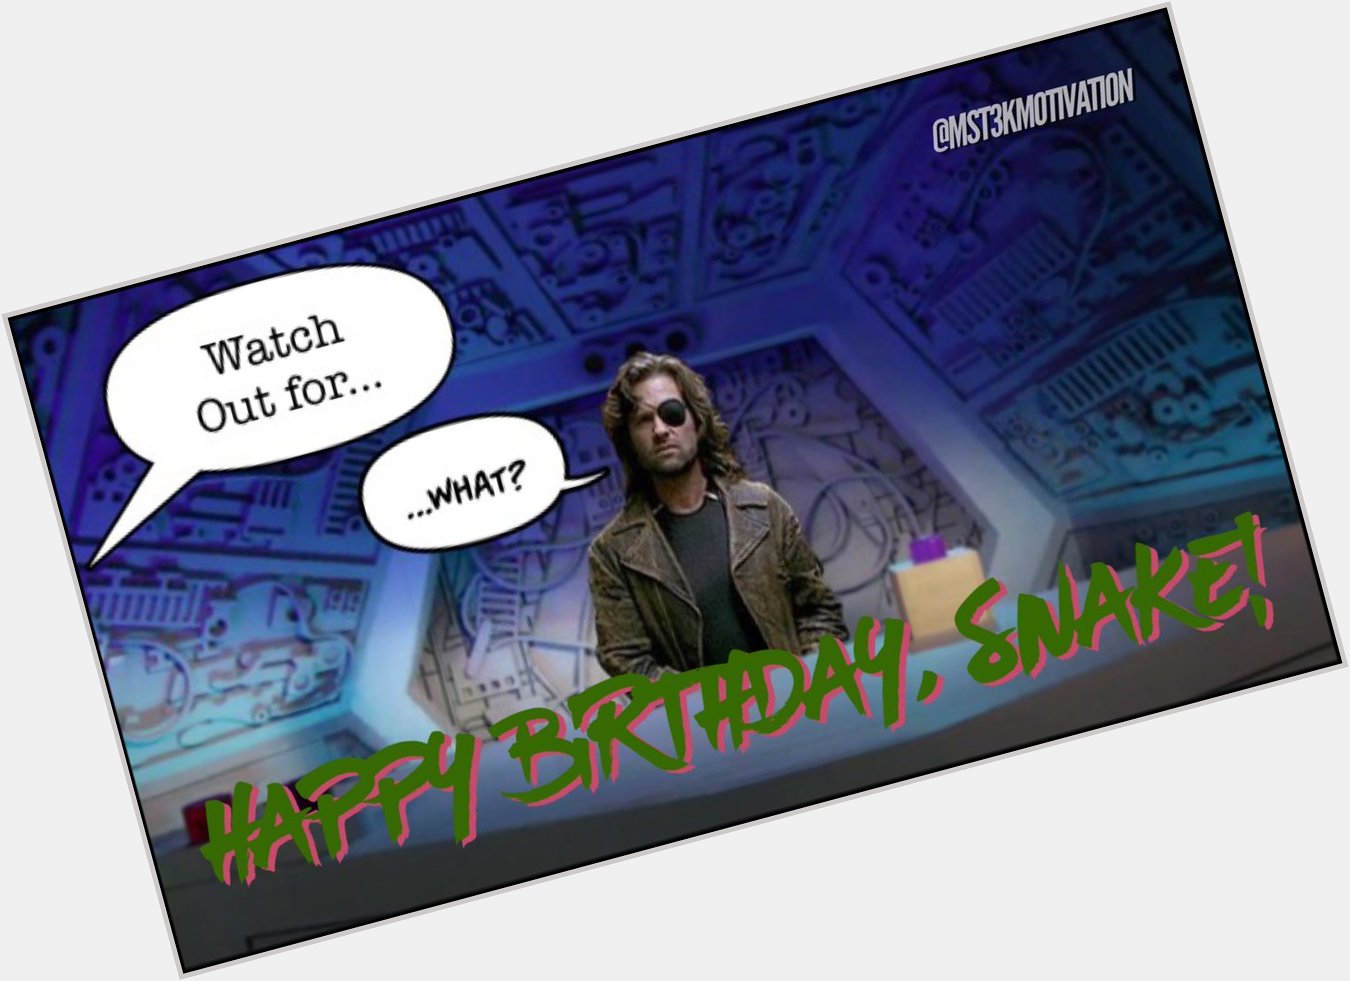 Ok so there is just ONE Snake on Happy Birthday Kurt Russell!!!   